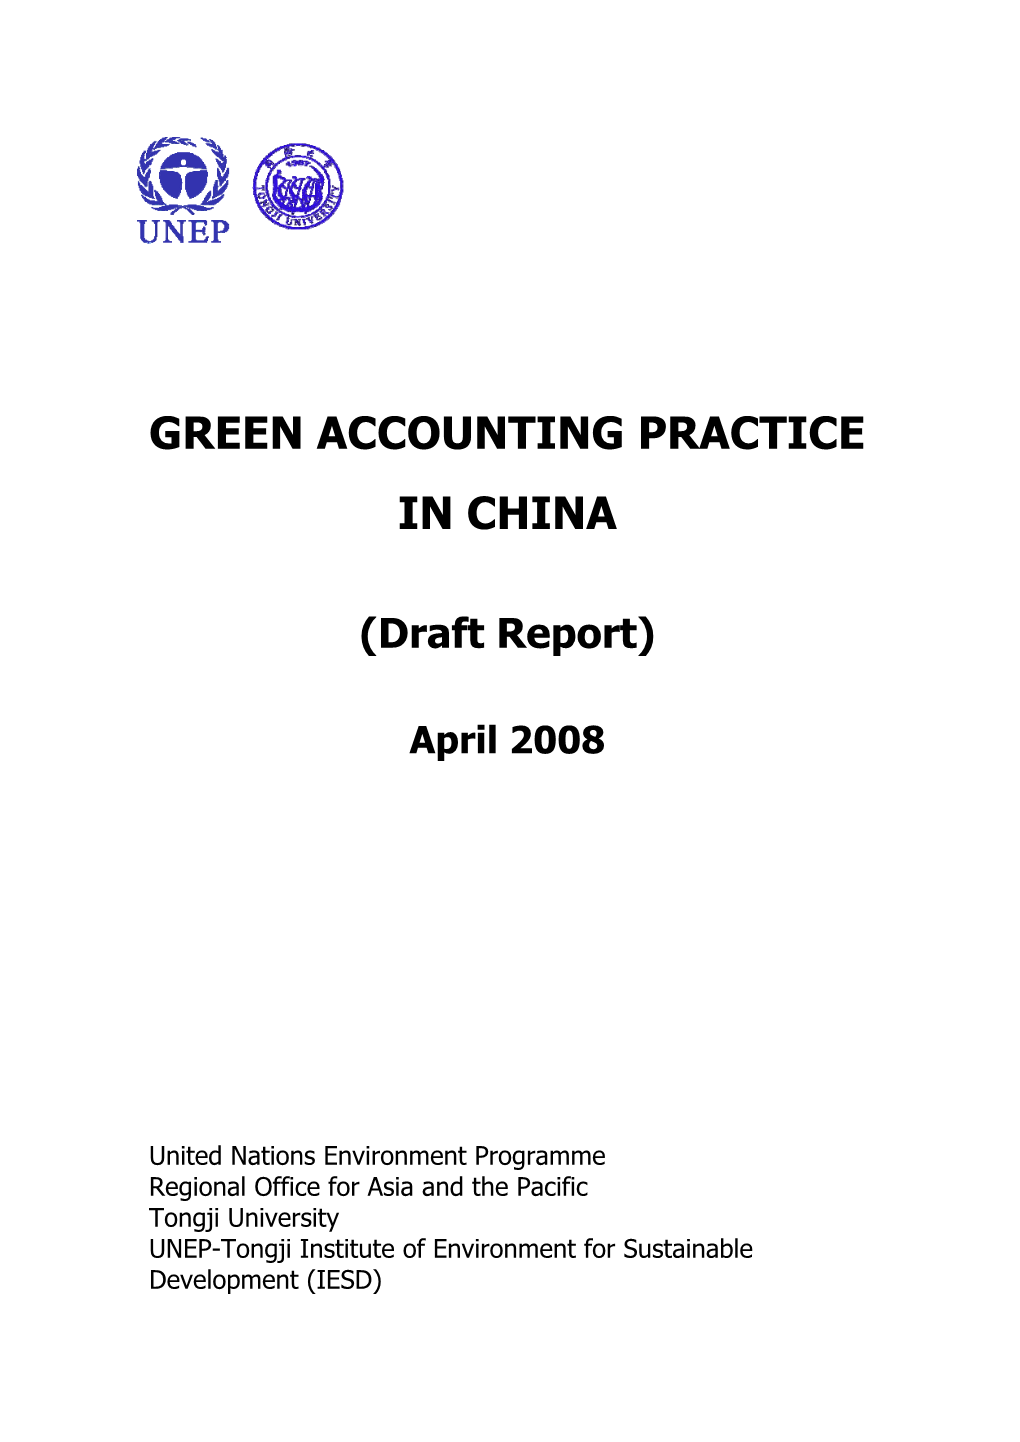 Green Accounting Practice in China